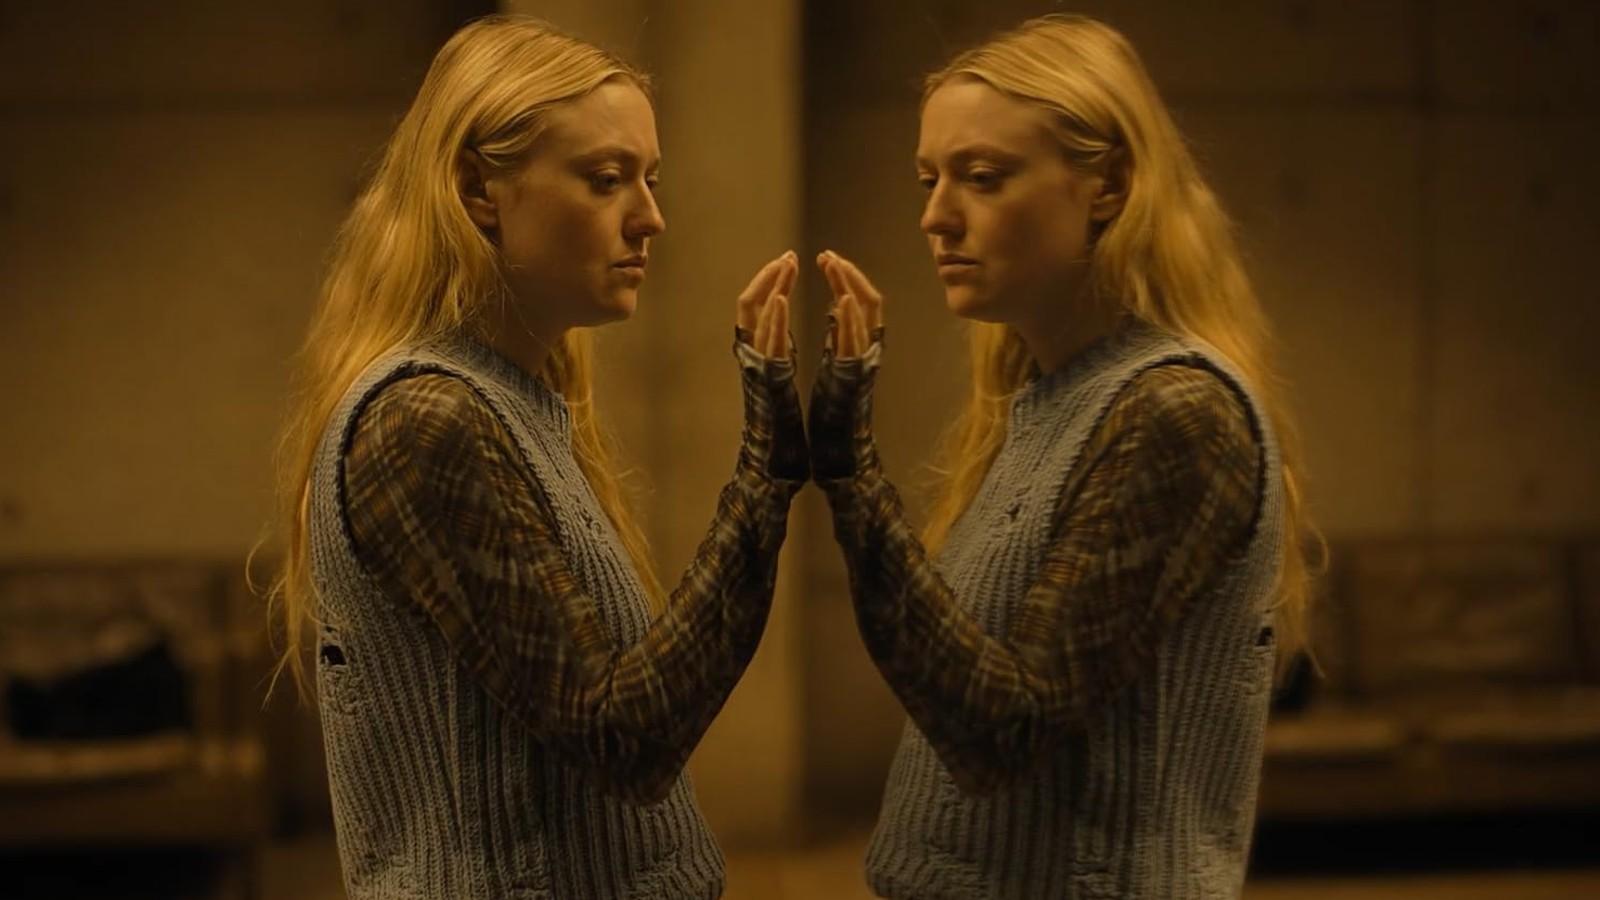 Dakota Fanning comes face-to-face with herself in a mirror in The Watcher.